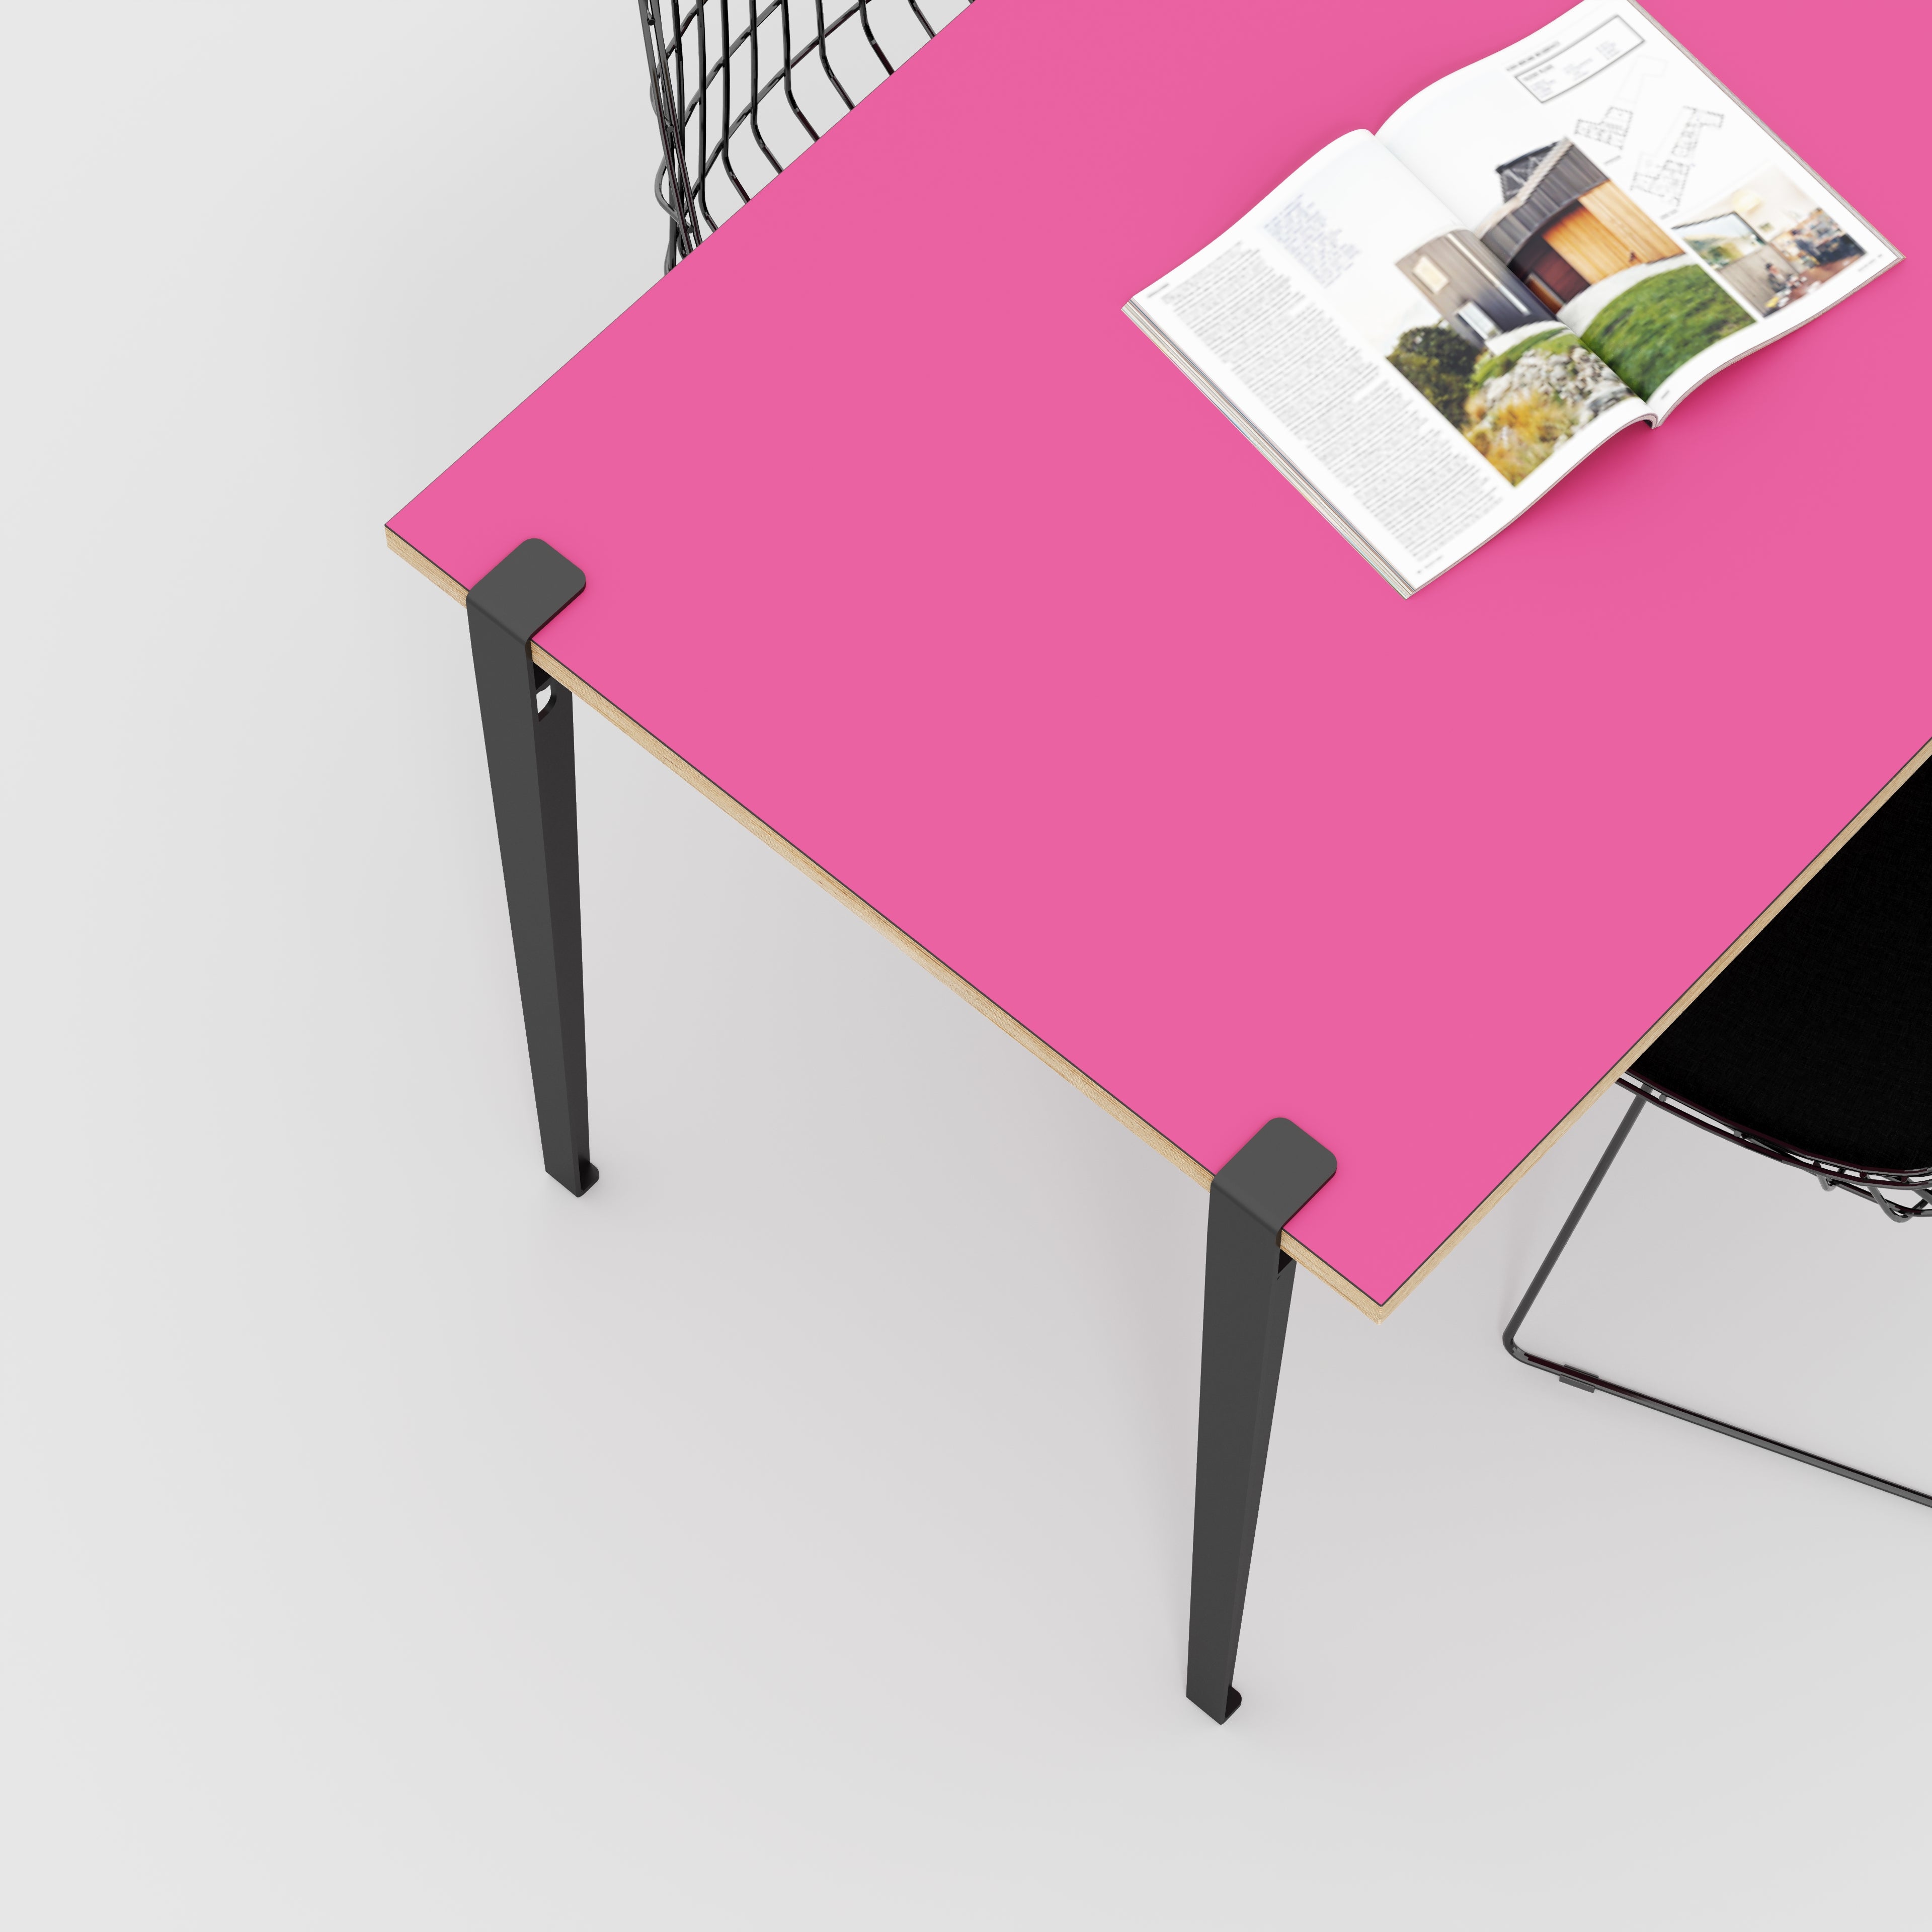 Wall Table with Black Tiptoe Legs and Brackets - Formica Juicy Pink - 1200(w) x 800(d) x 750(h)